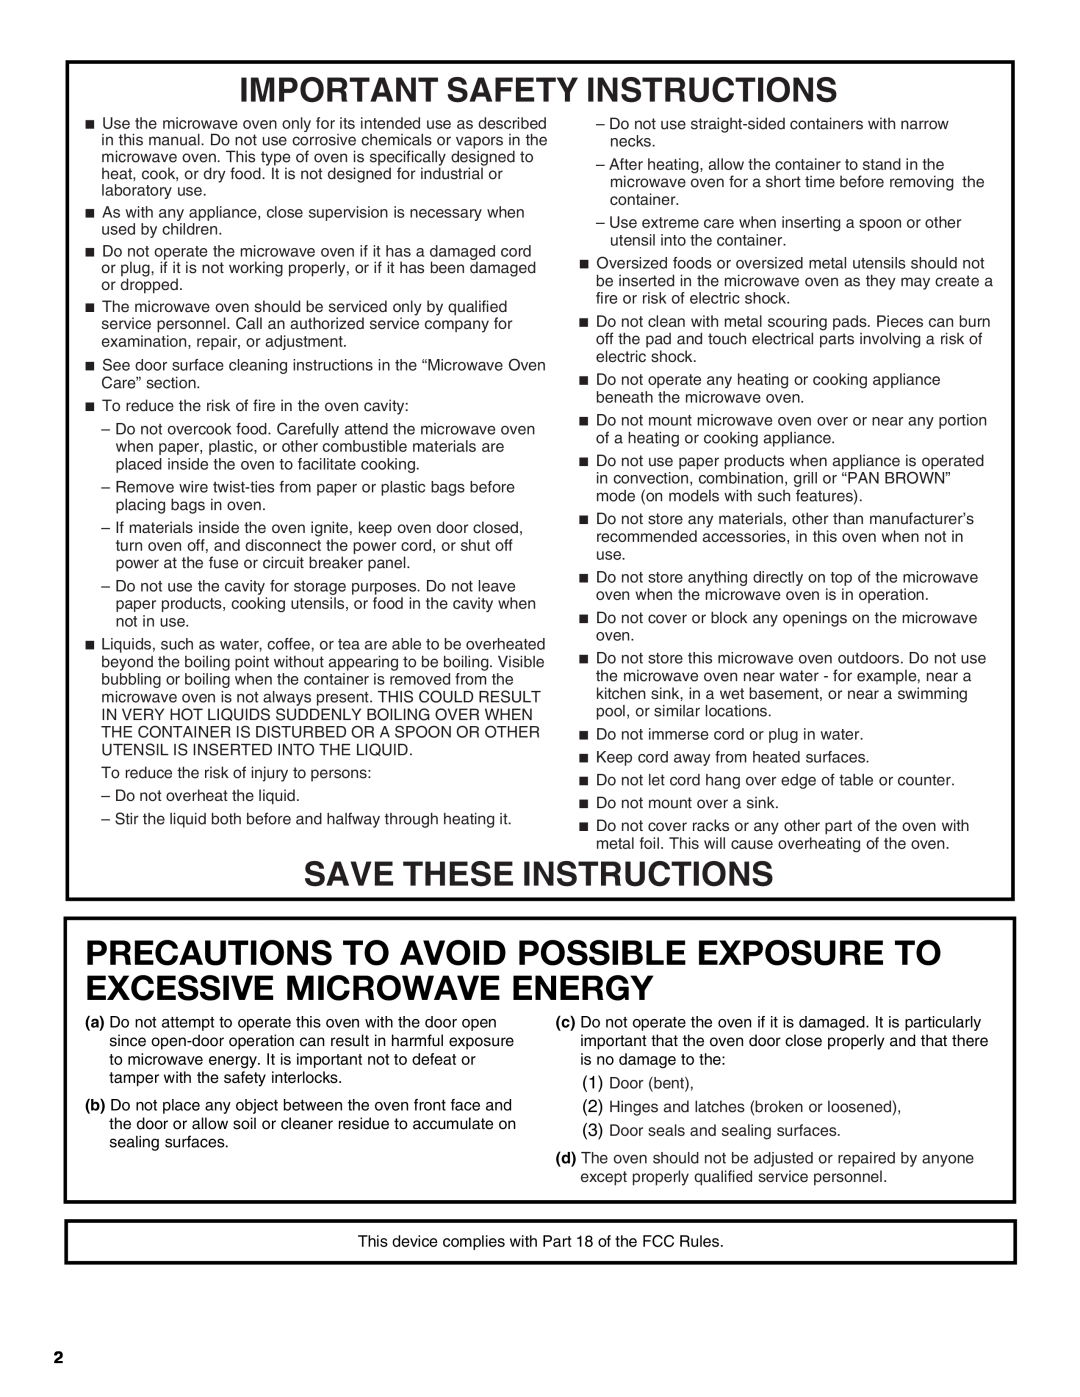 Jenn-Air W10244851A Precautions To Avoid Possible Exposure To Excessive Microwave Energy, Important Safety Instructions 